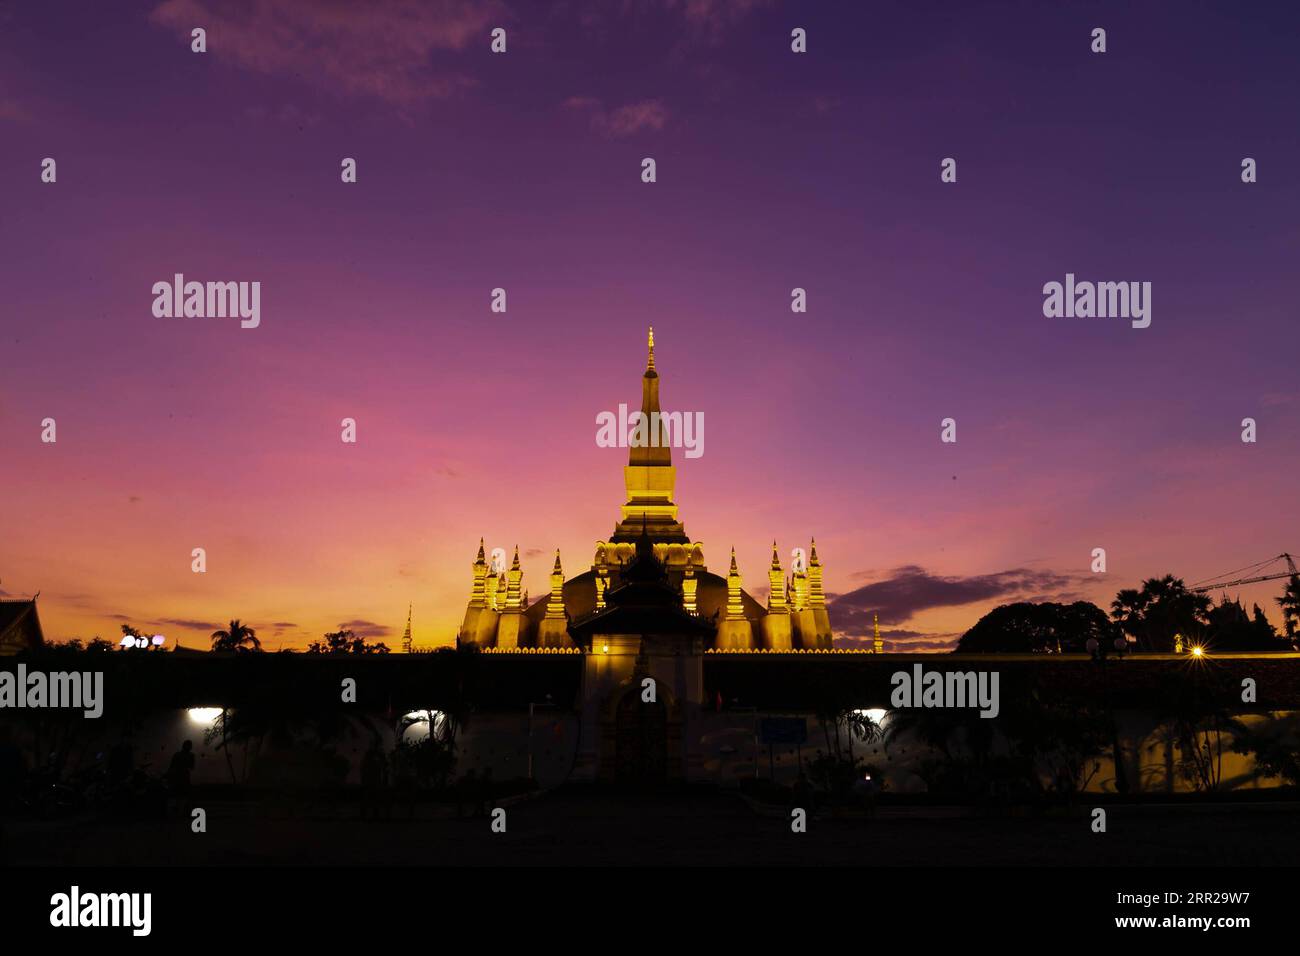 201007 -- VIENTIANE, Oct. 7, 2020 -- Photo taken on Nov. 5, 2019 shows a night view of That Luang Stupa in Vientiane, Laos. Laos is the only landlocked country in Southeast Asia. In the central part of the country, the capital Vientiane is located on the alluvial plain on the Mekong River, suitable for fishing and plantation. The Lan Xang Kingdom, the first unified multi-ethnic nation in the history of Laos, moved its capital to Vientiane in the mid-16th century, and Vientiane gradually prospered. Photo by /Xinhua CitySketchLAOS-VIENTIANE KaikeoxSaiyasane PUBLICATIONxNOTxINxCHN Stock Photo